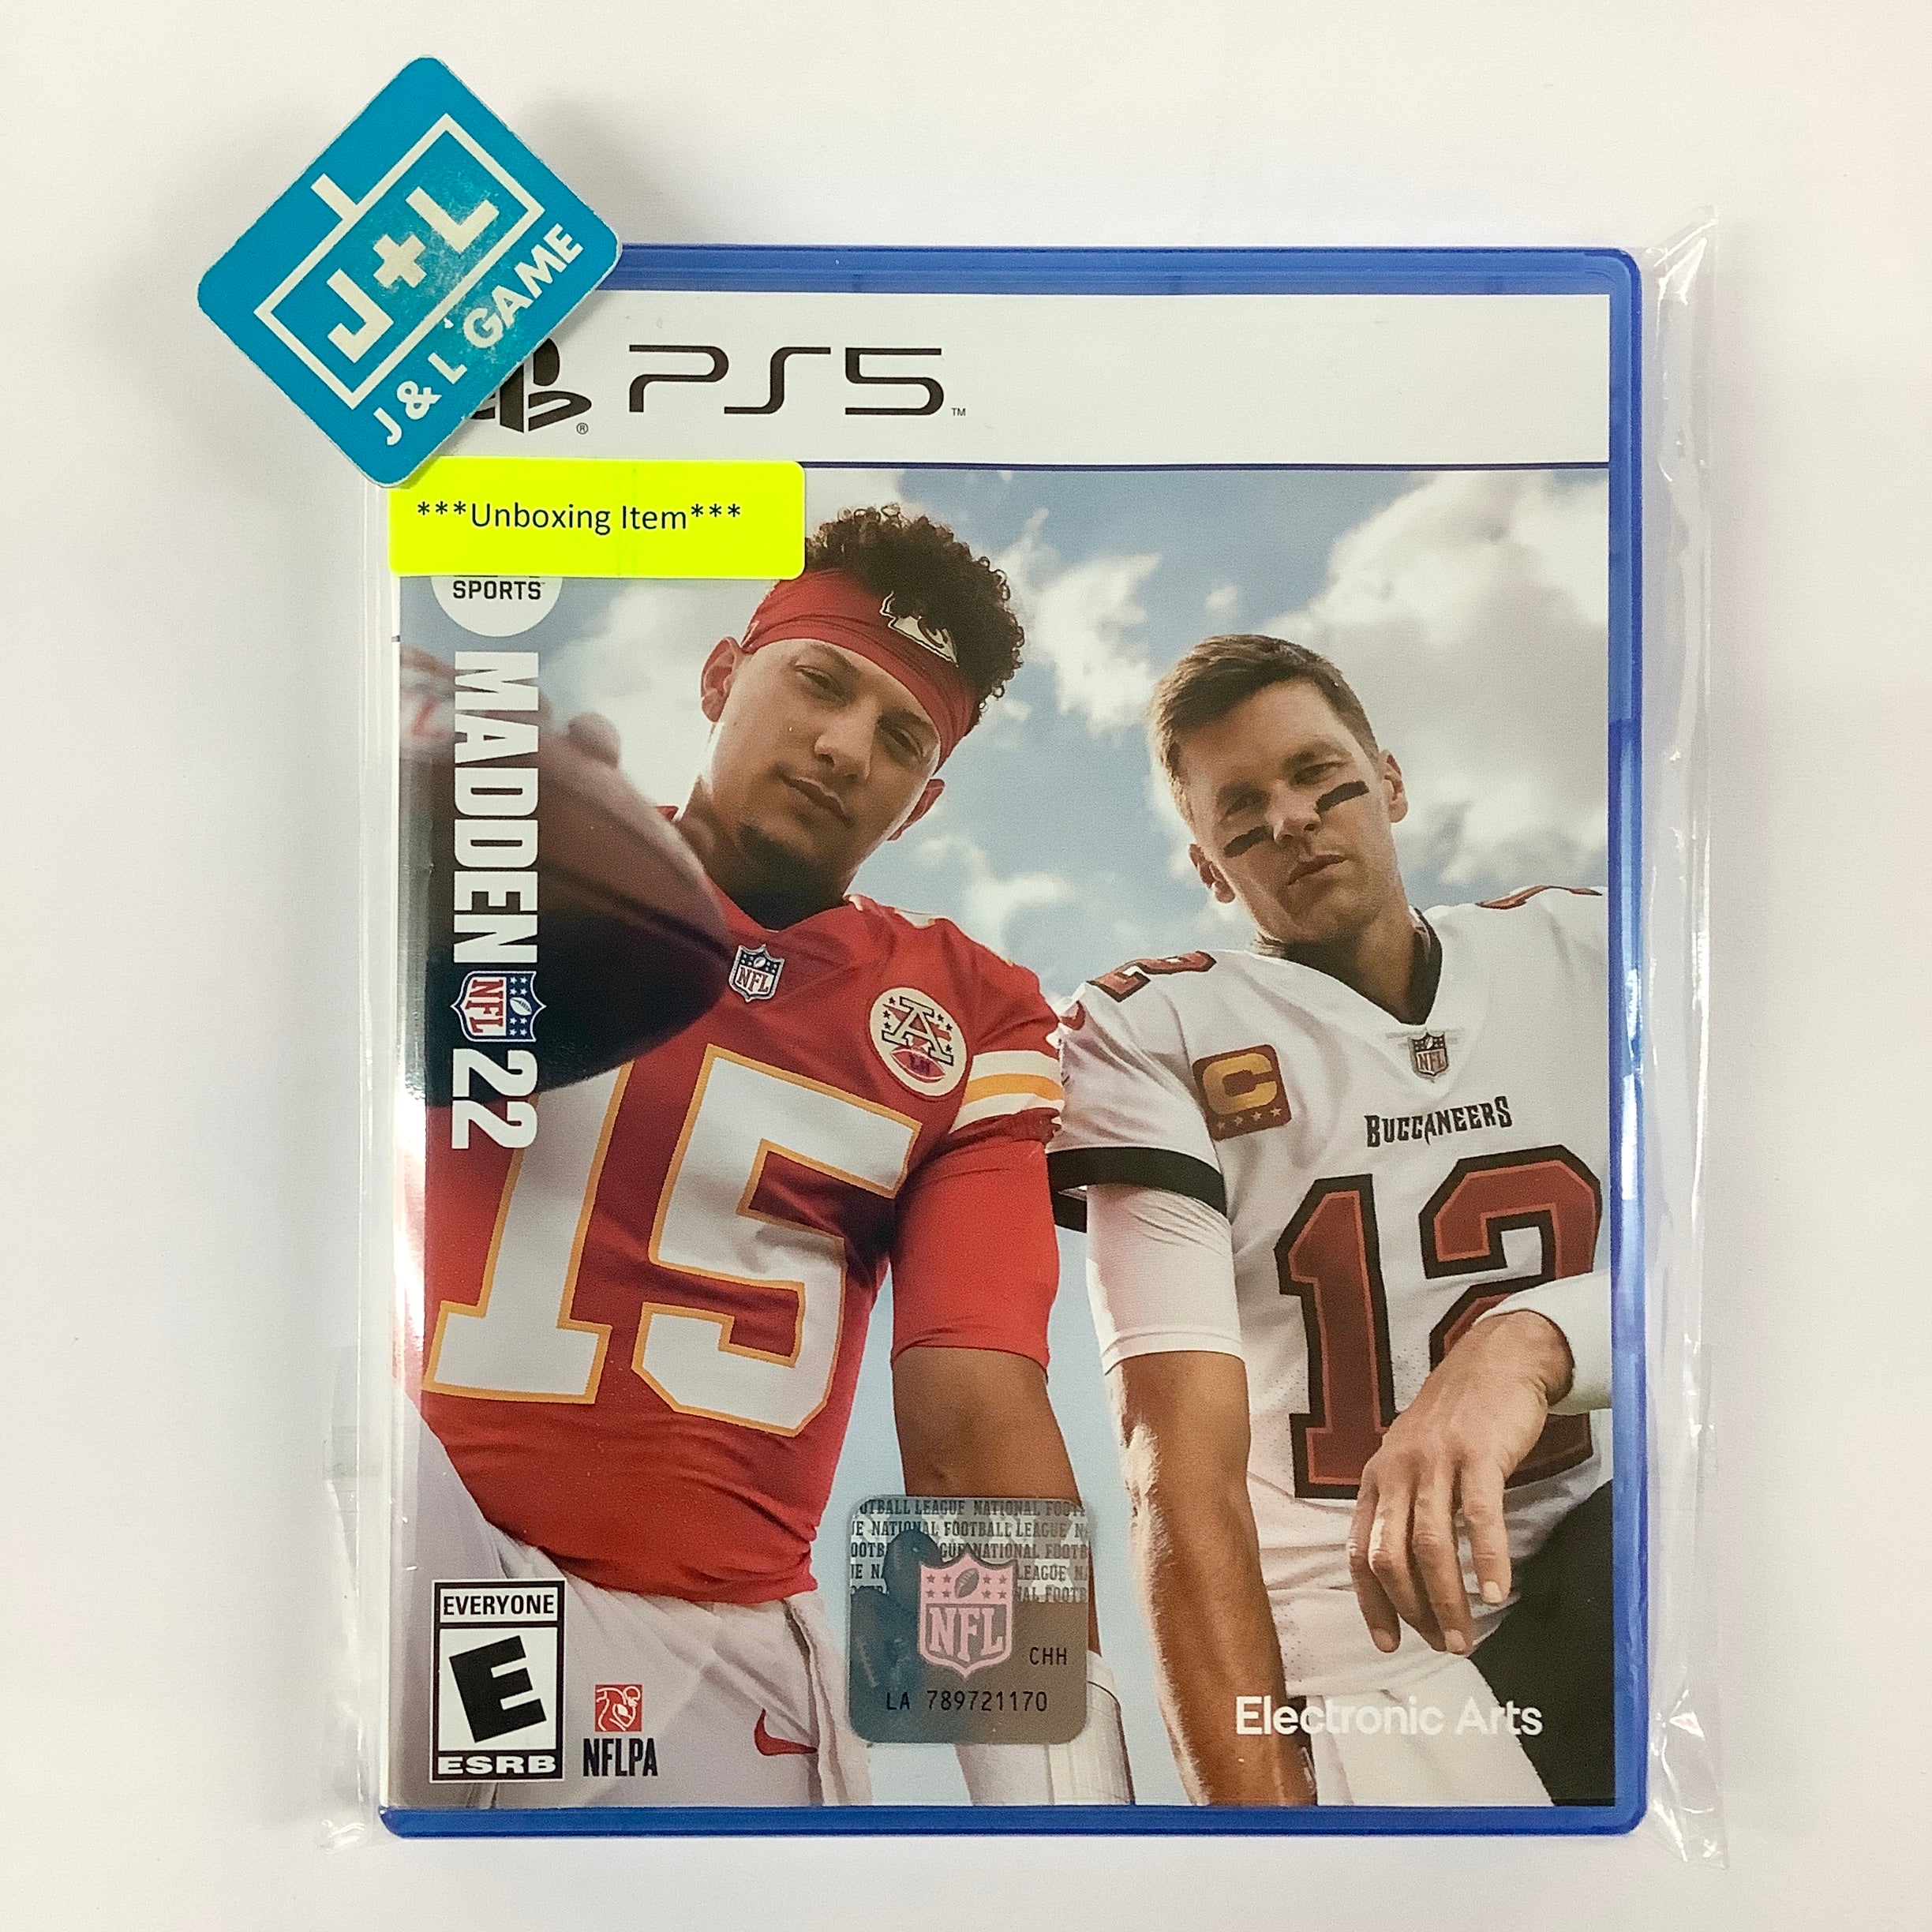 Madden NFL 22 - (PS5) PlayStation 5 [UNBOXING] Video Games Electronic Arts   